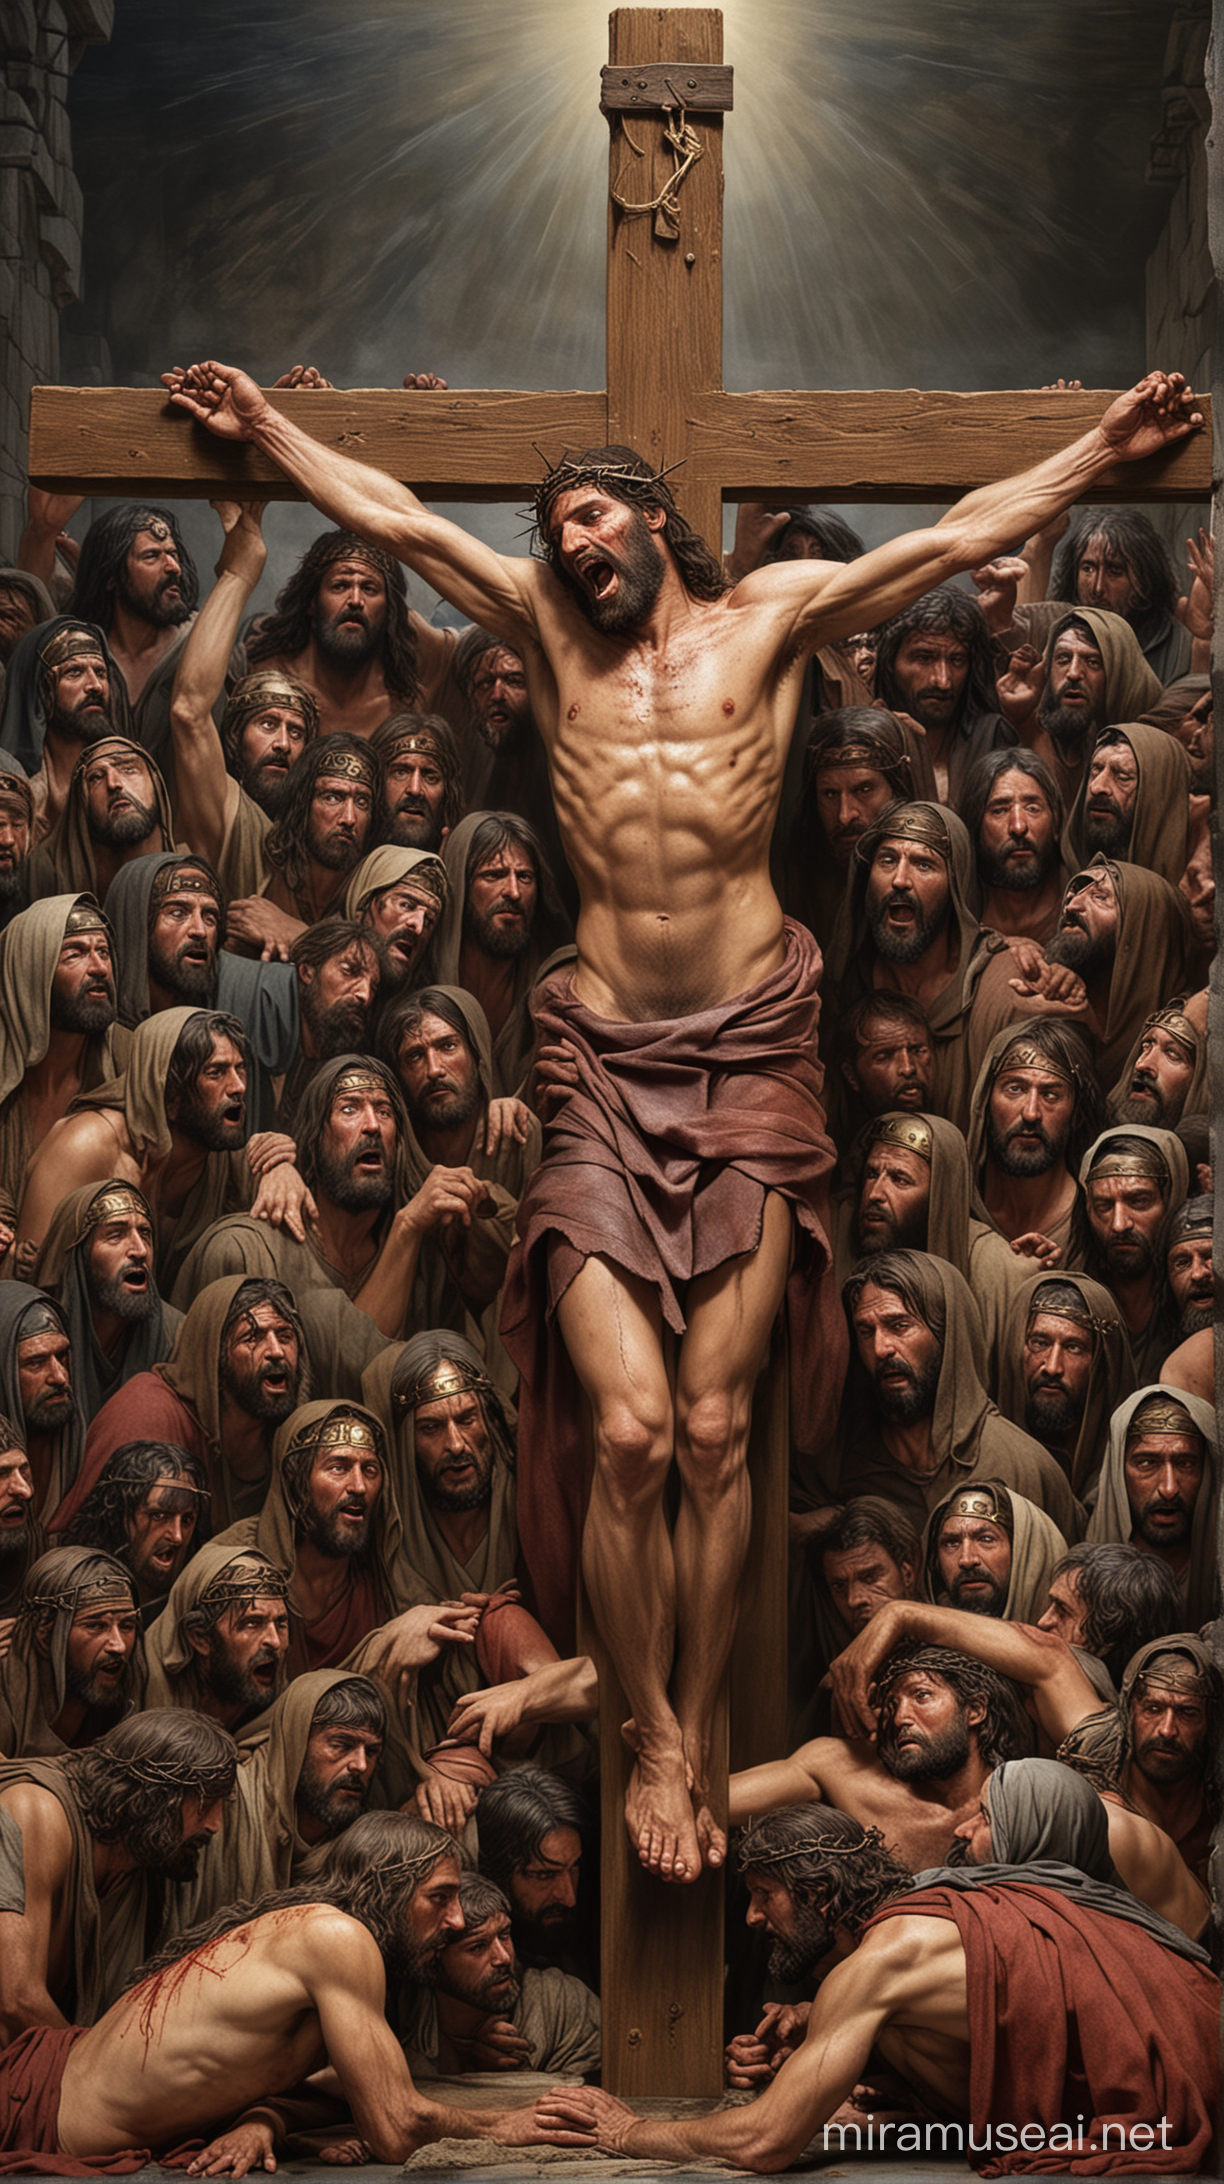 Passion of Christ Depicted in Vibrant Religious Art